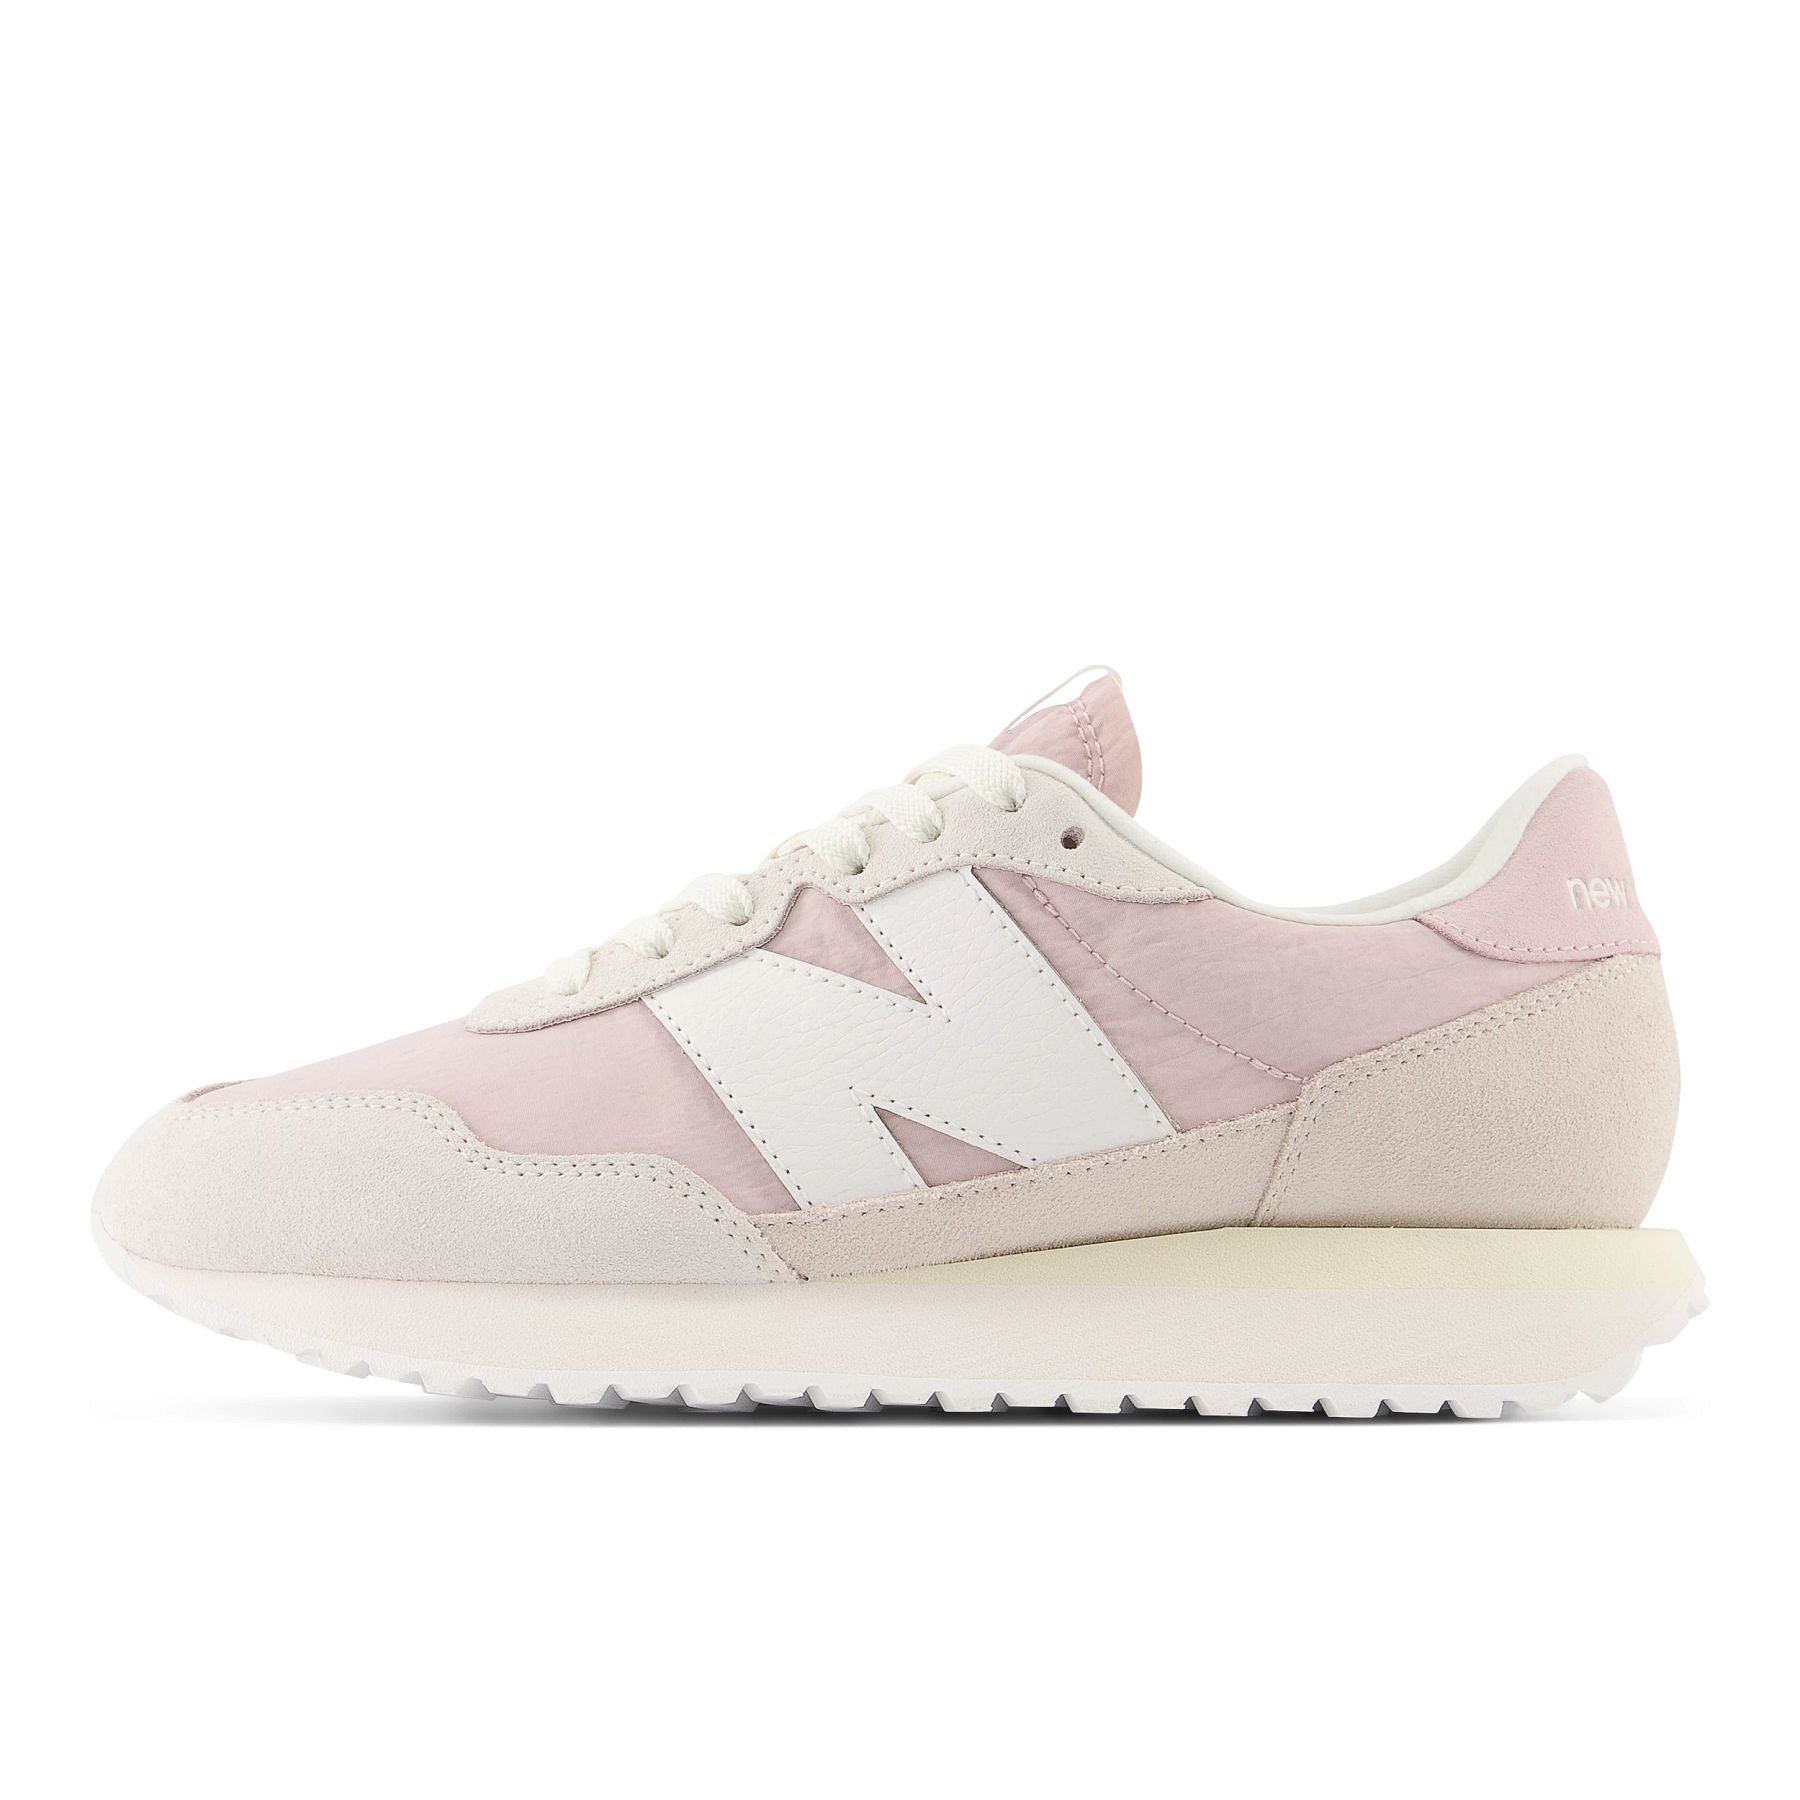 Medial view of the Women's New Balance lifestyle 237 shoe in white